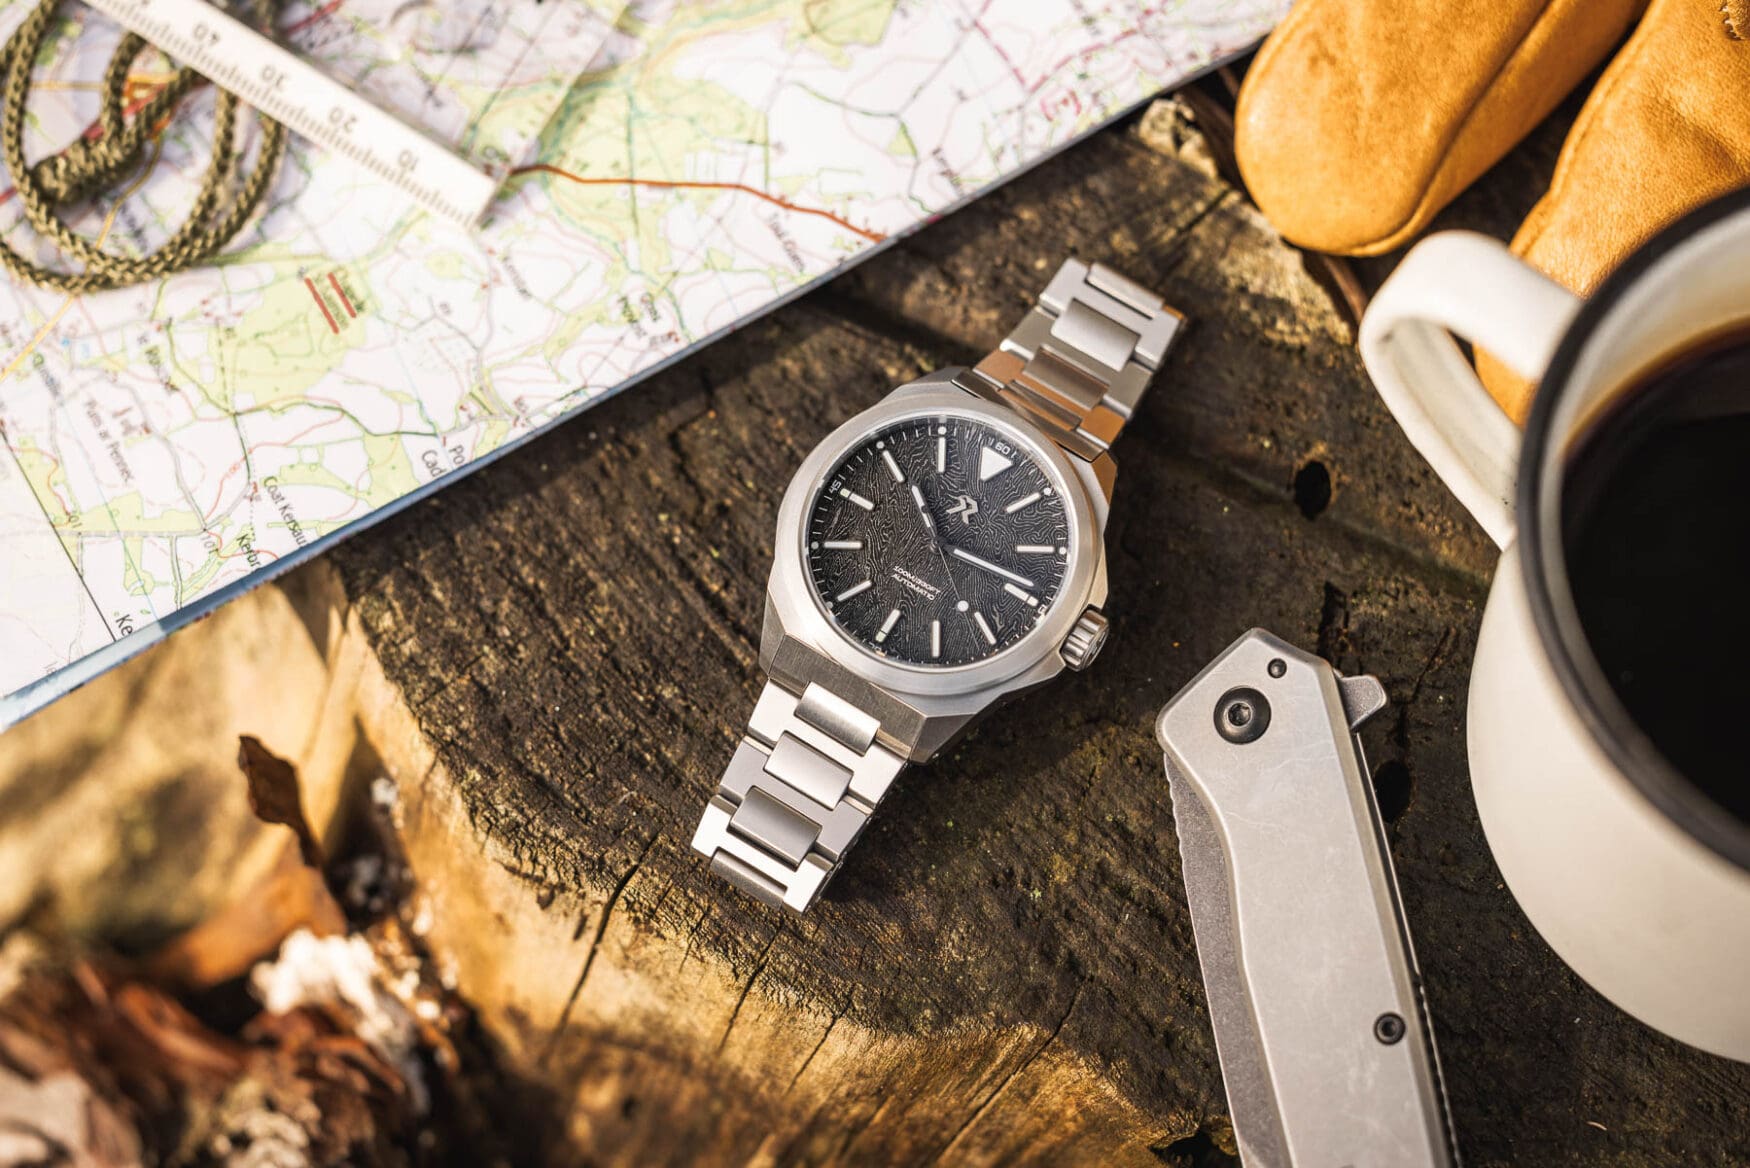 Fratello teams up with titanium specialist RZE for a rugged everyday tool watch